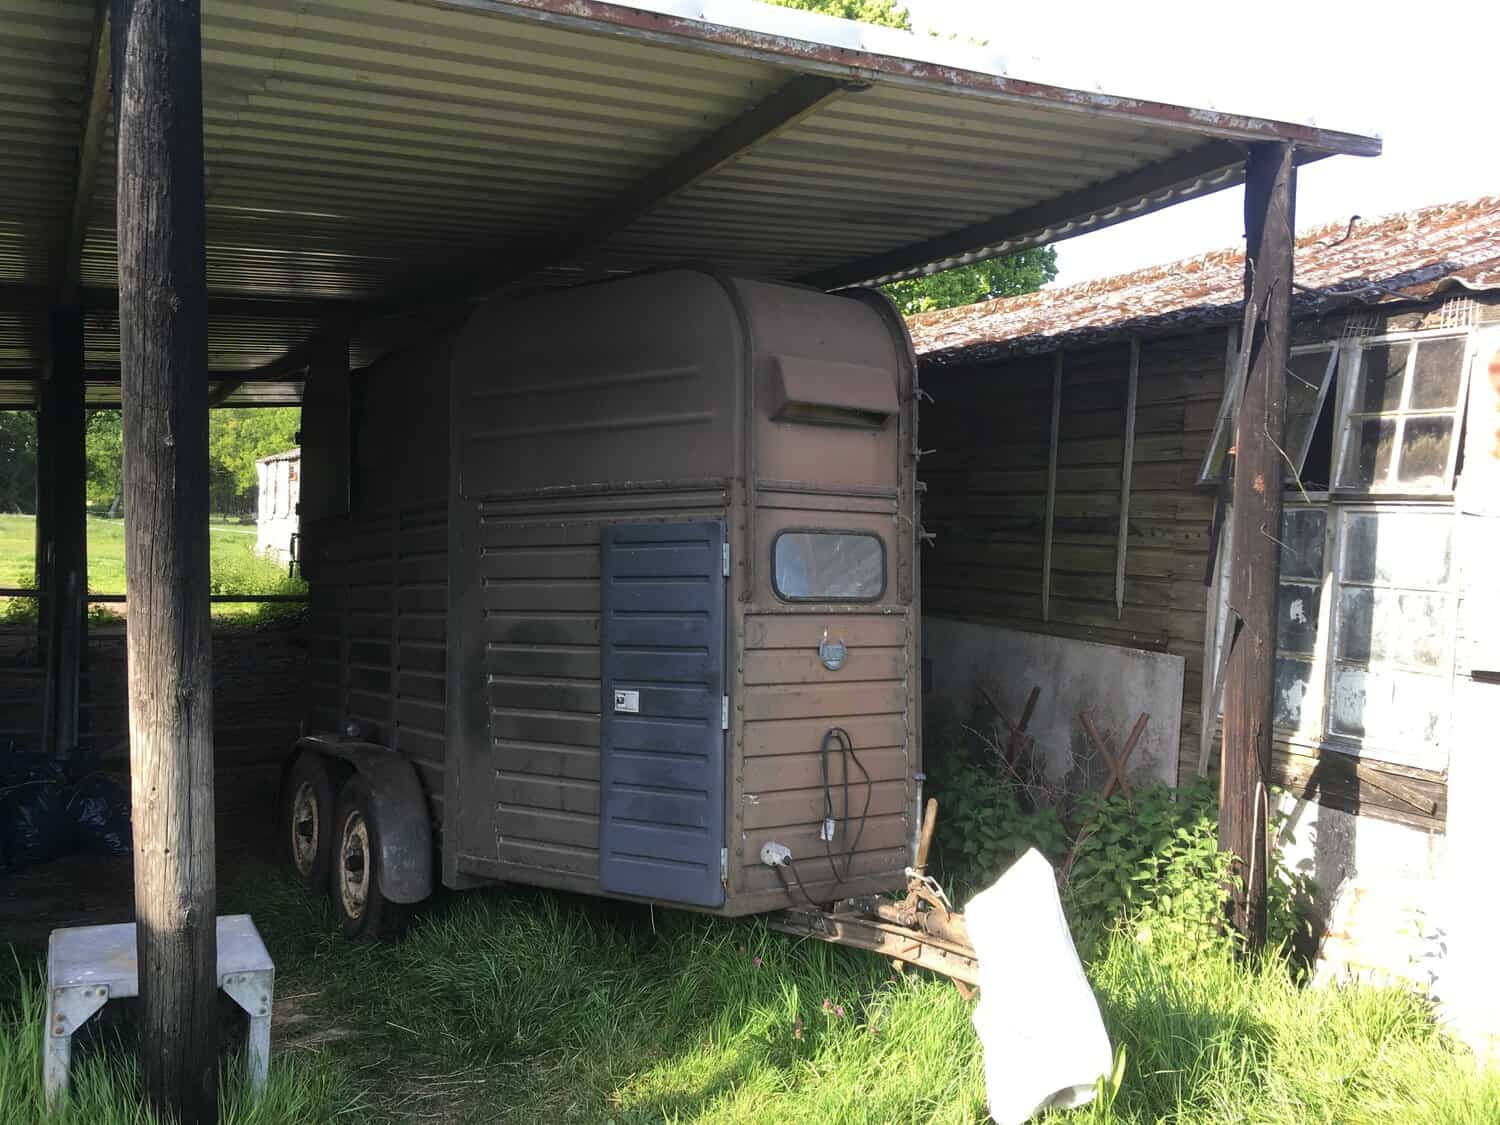 The "brown" horse box under a lean-to